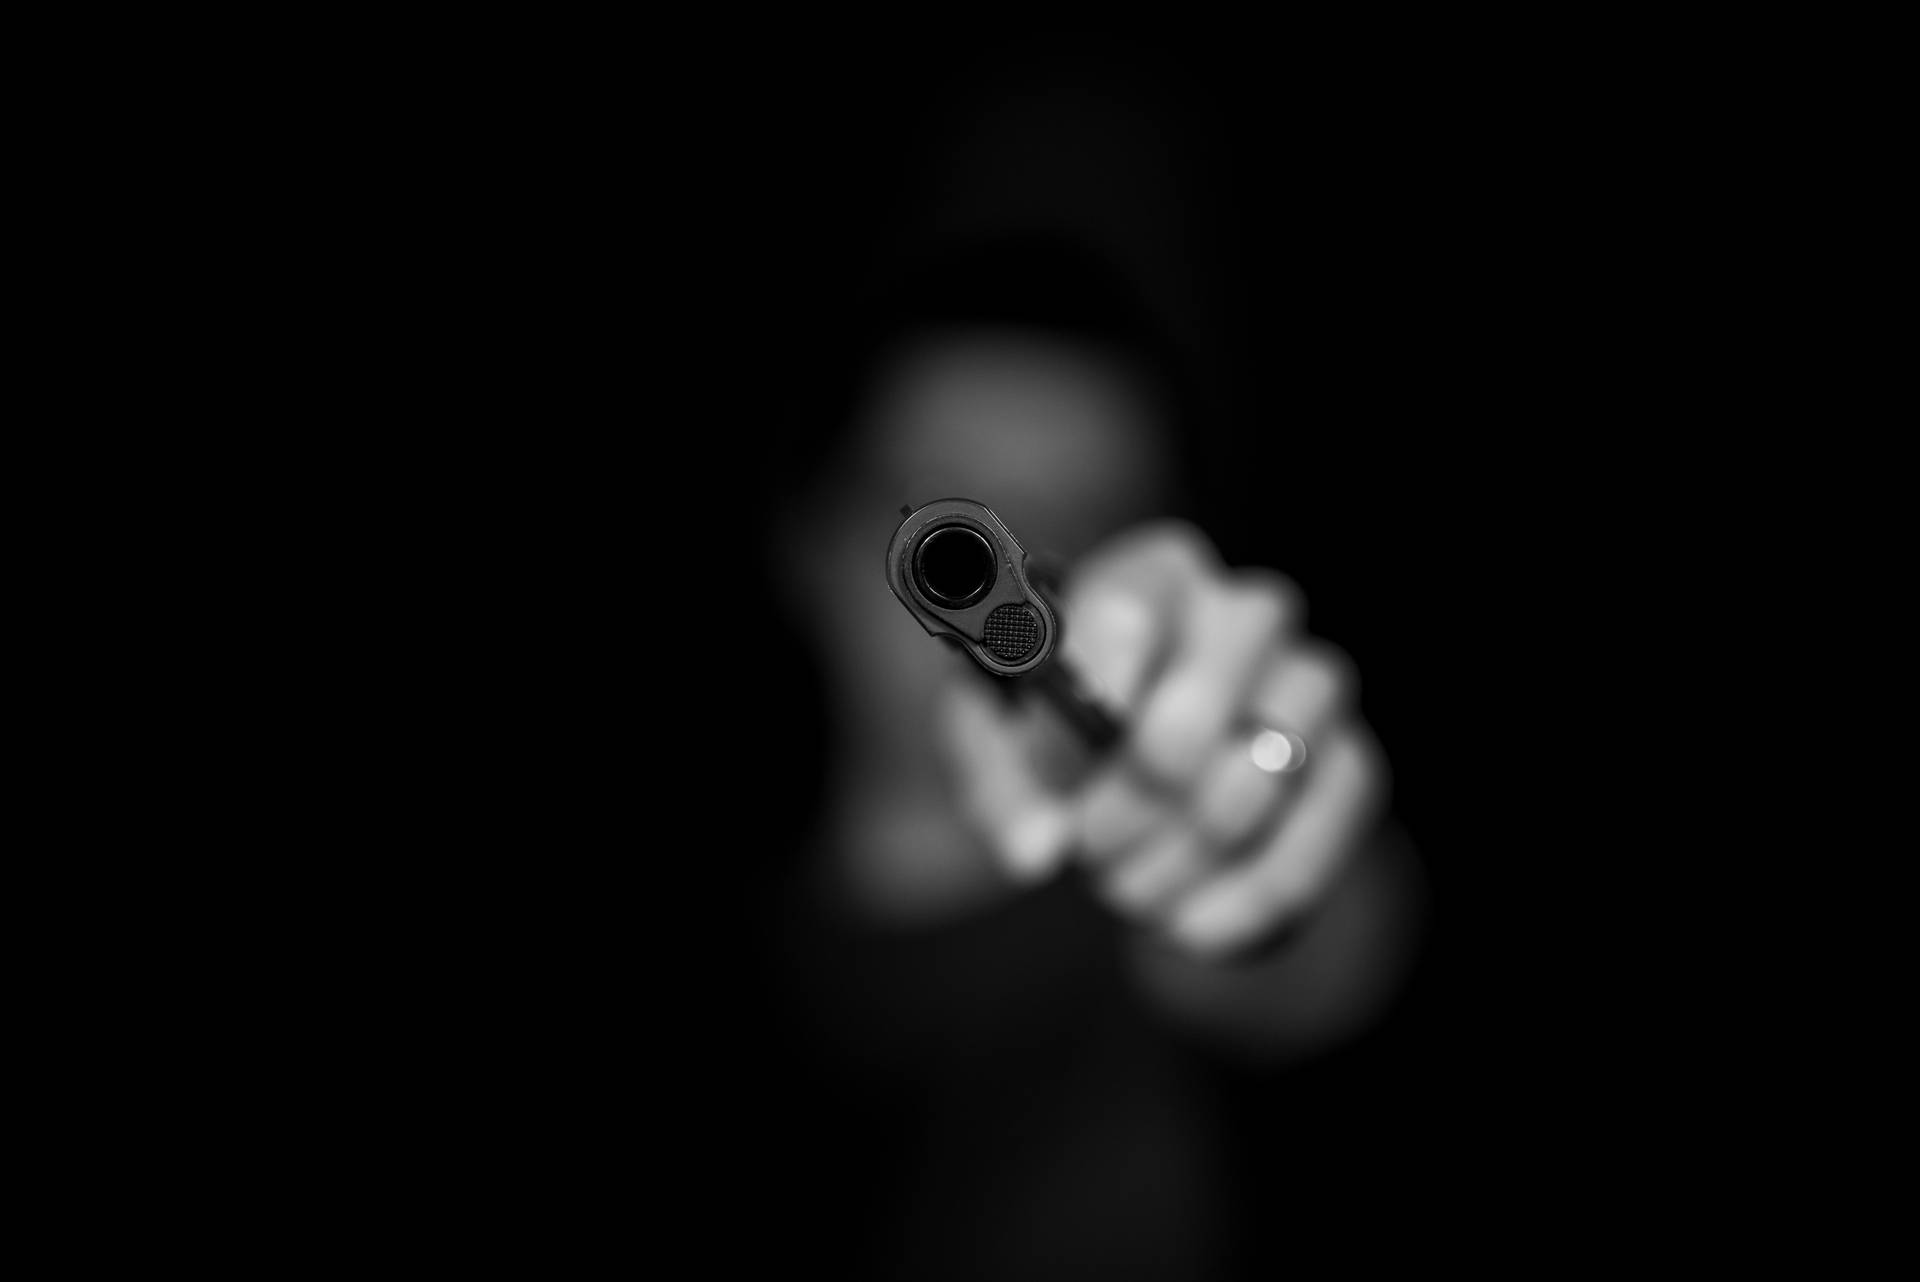 Gun 6016X4016 Wallpaper and Background Image